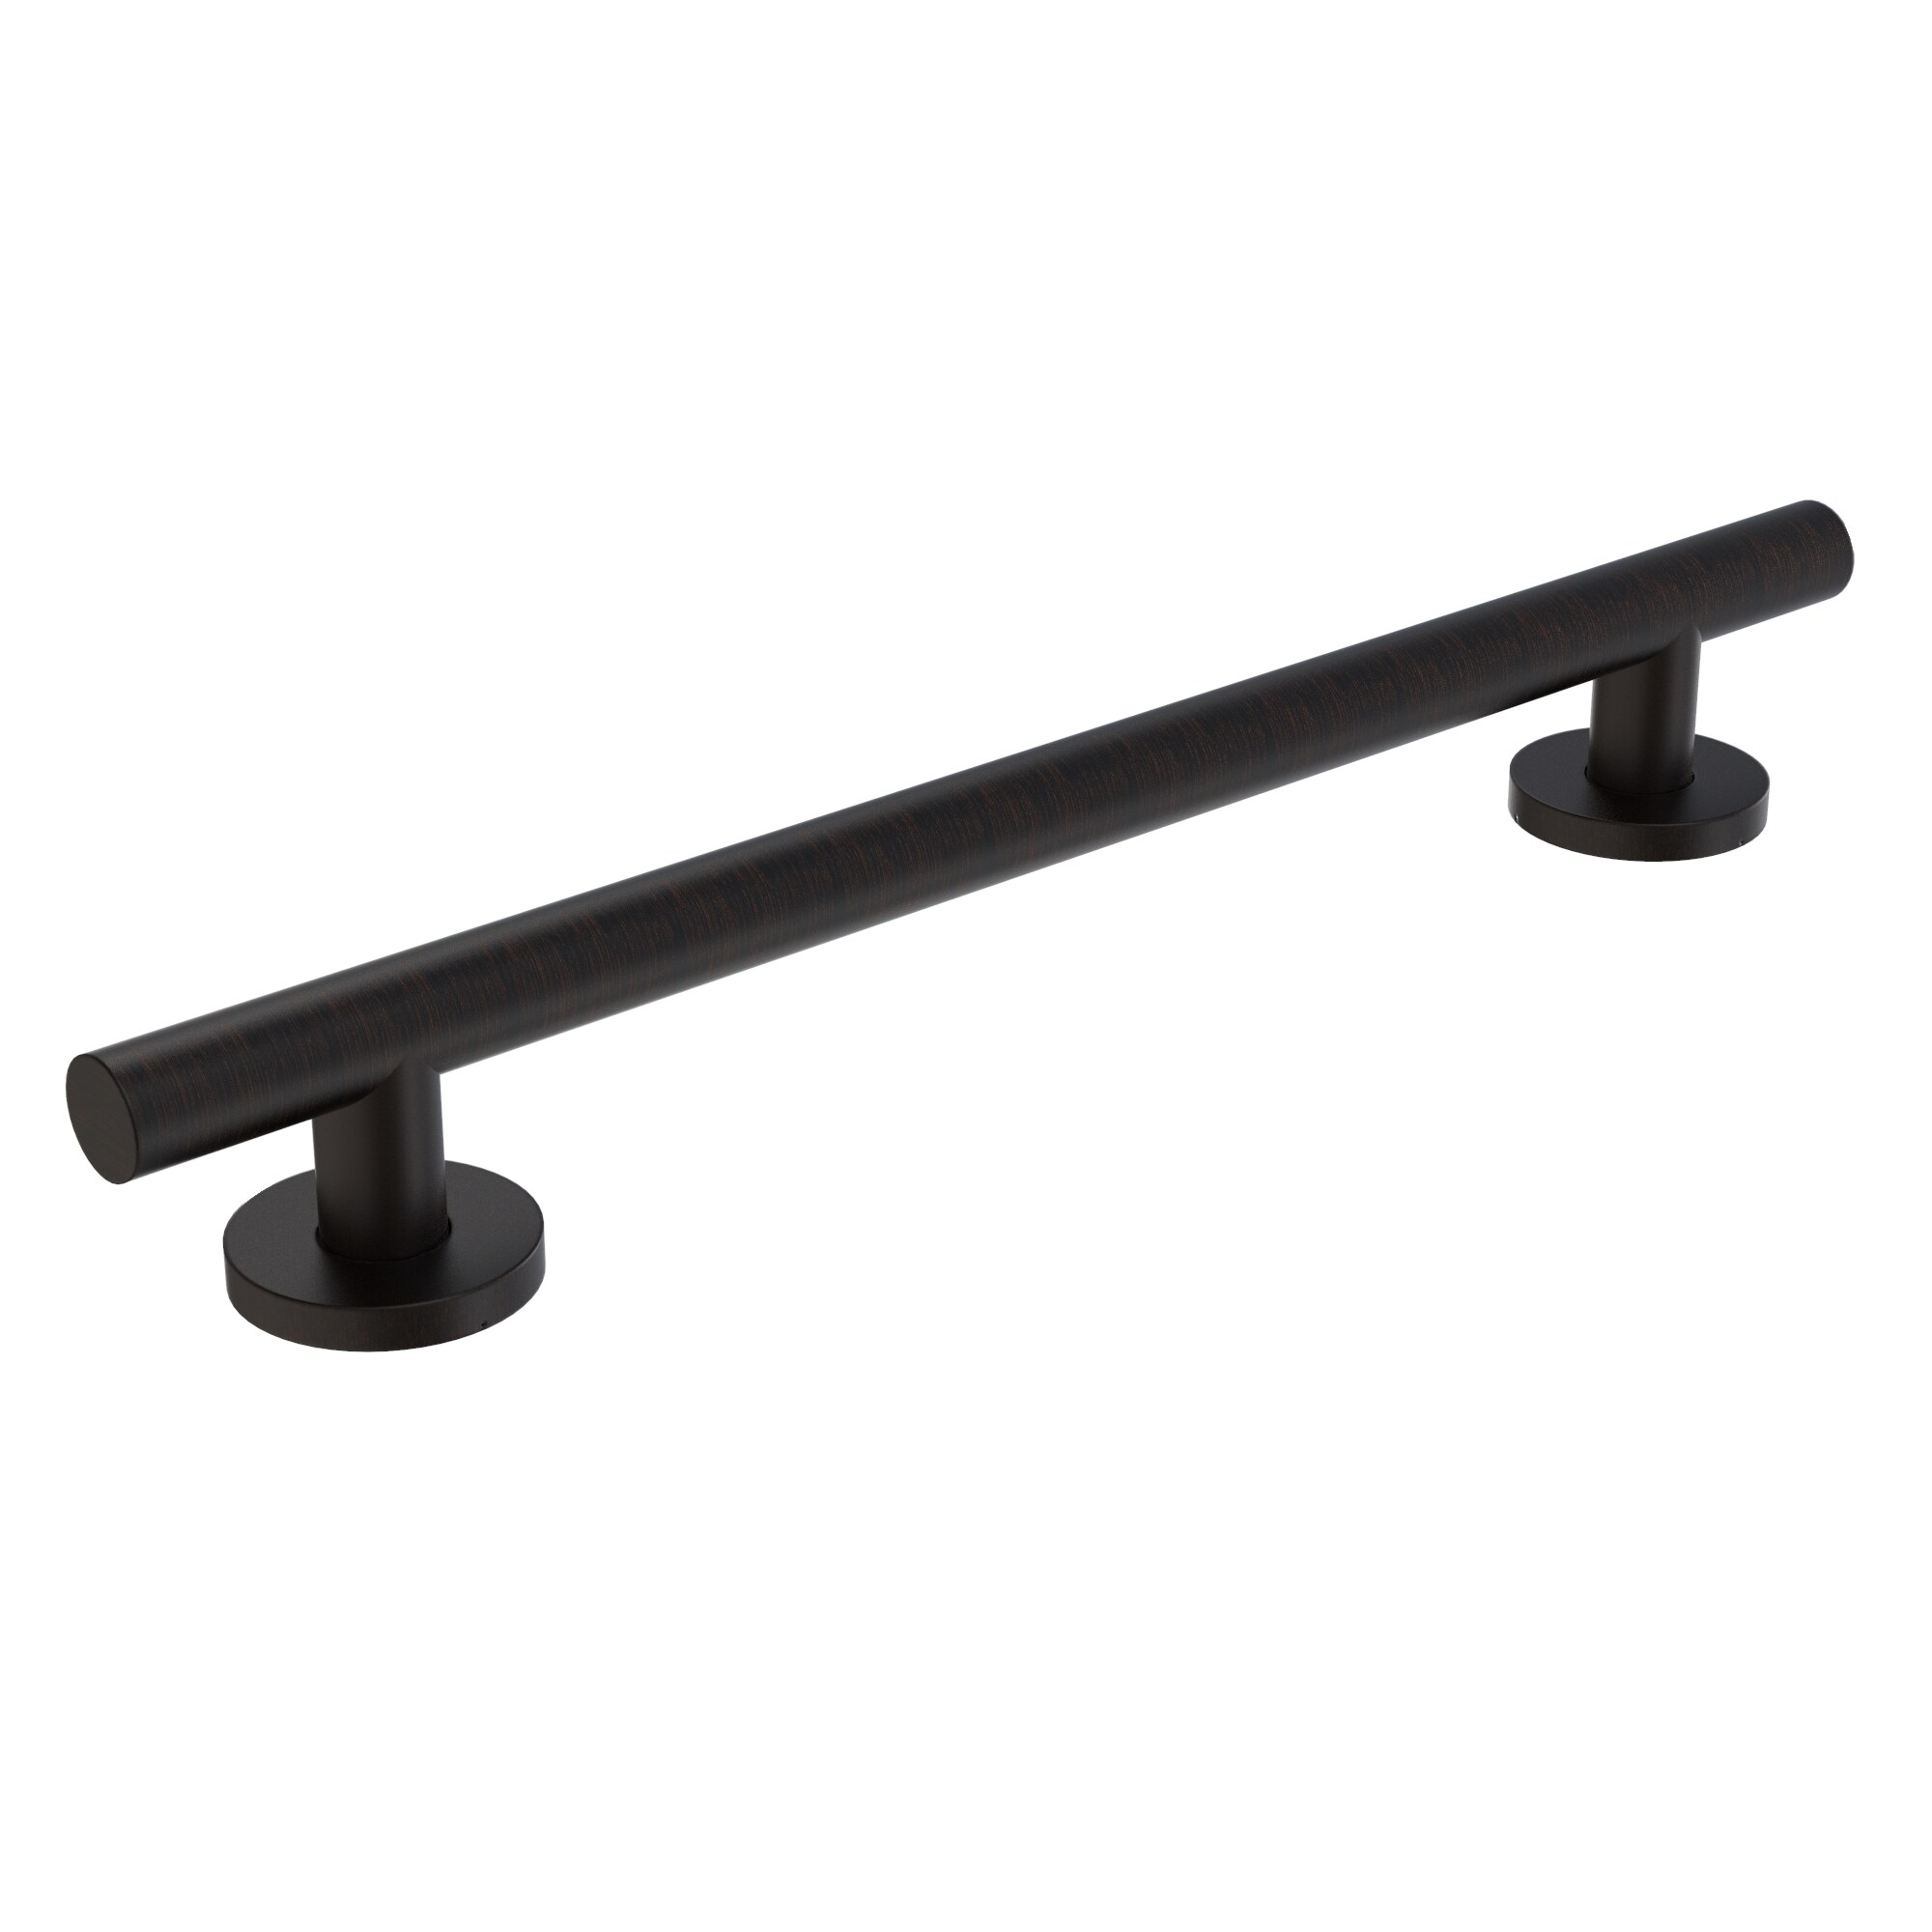 Keeney Infinity 16-in Oil Rubbed Bronze Wall Mount Ada Compliant Grab Bar (250-lb Weight Capacity)